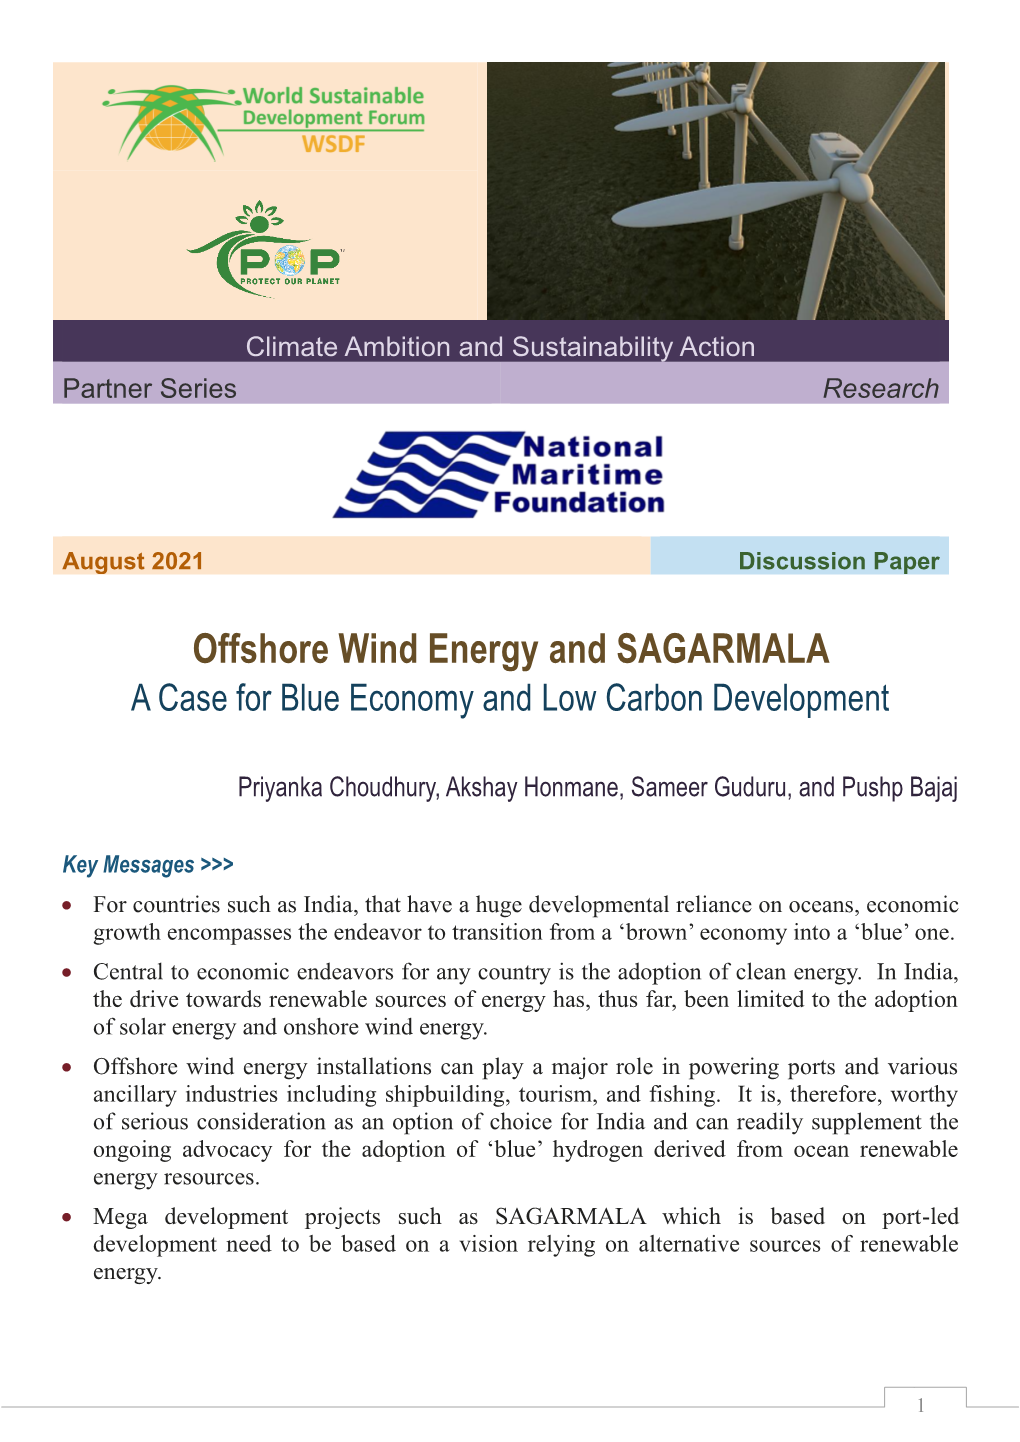 Offshore Wind Energy and SAGARMALA a Case for Blue Economy and Low Carbon Development